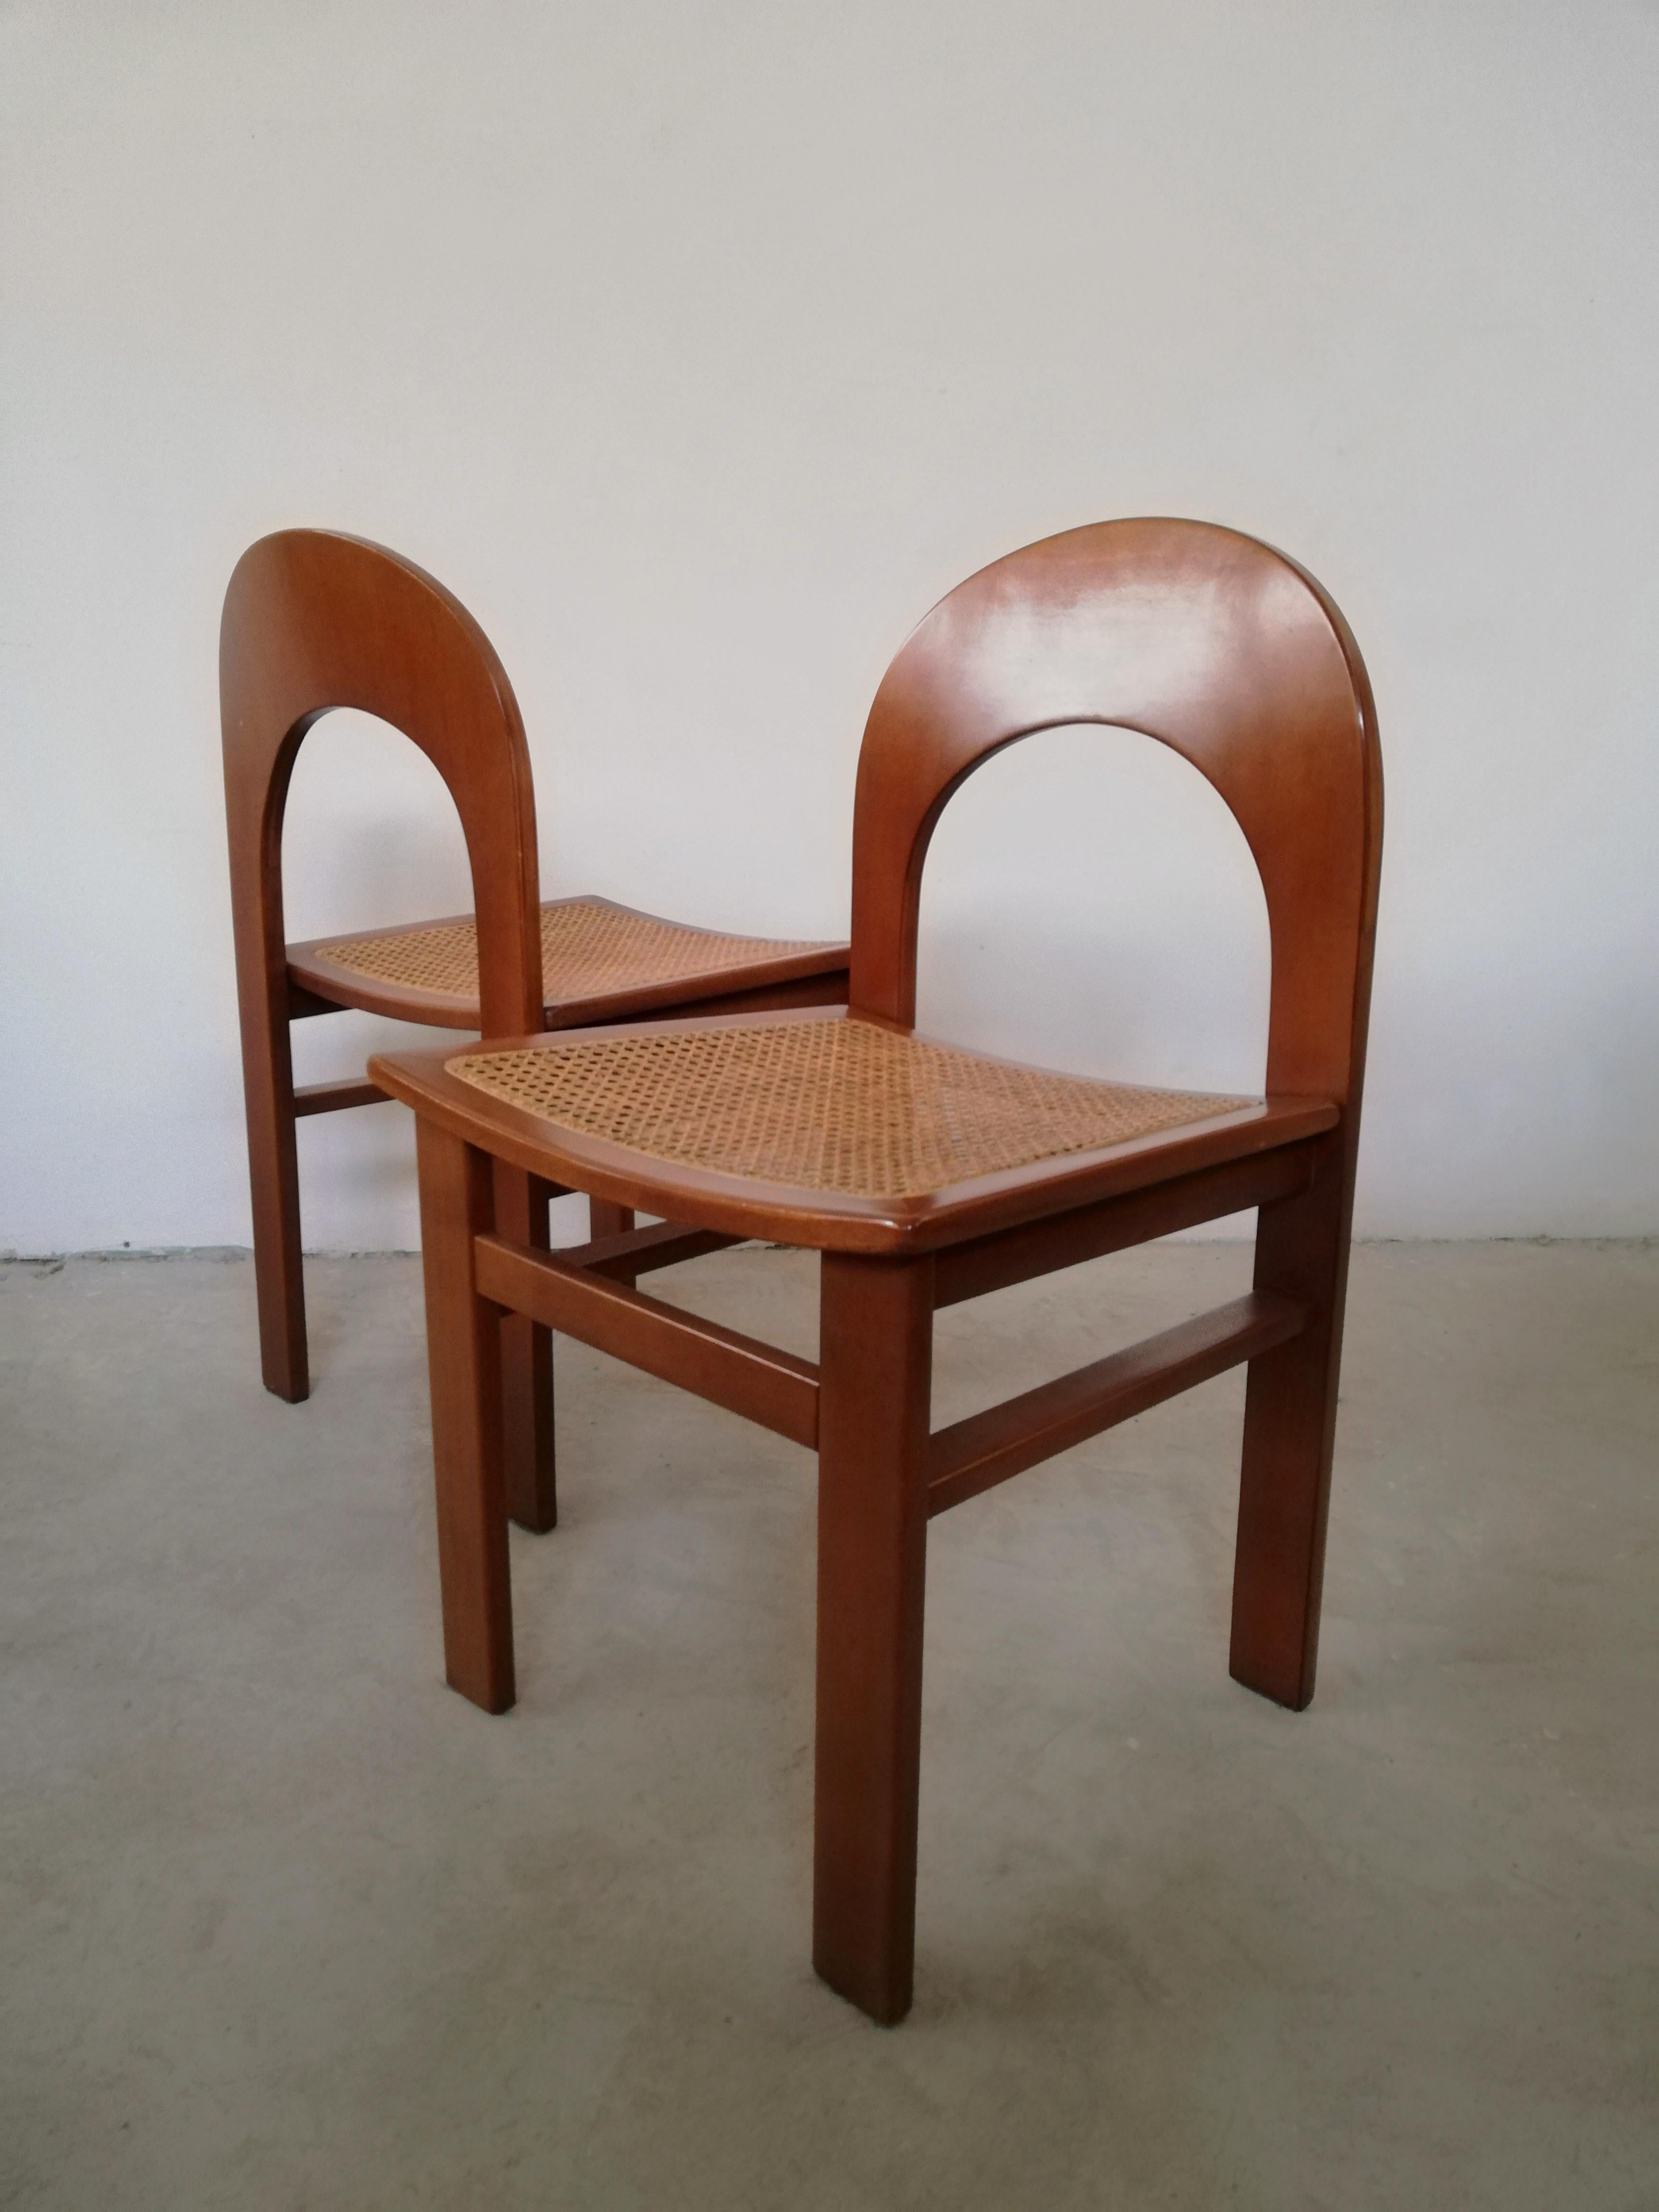 A difficult number to find, 6 of rare Italian 70s chairs designed by Adalberto Caraceni for Tagliabue of Cascina Armata.
Stable and solid, these mid century chairs are made in curved plywood, veneered in national walnut and Vienna straw.
The